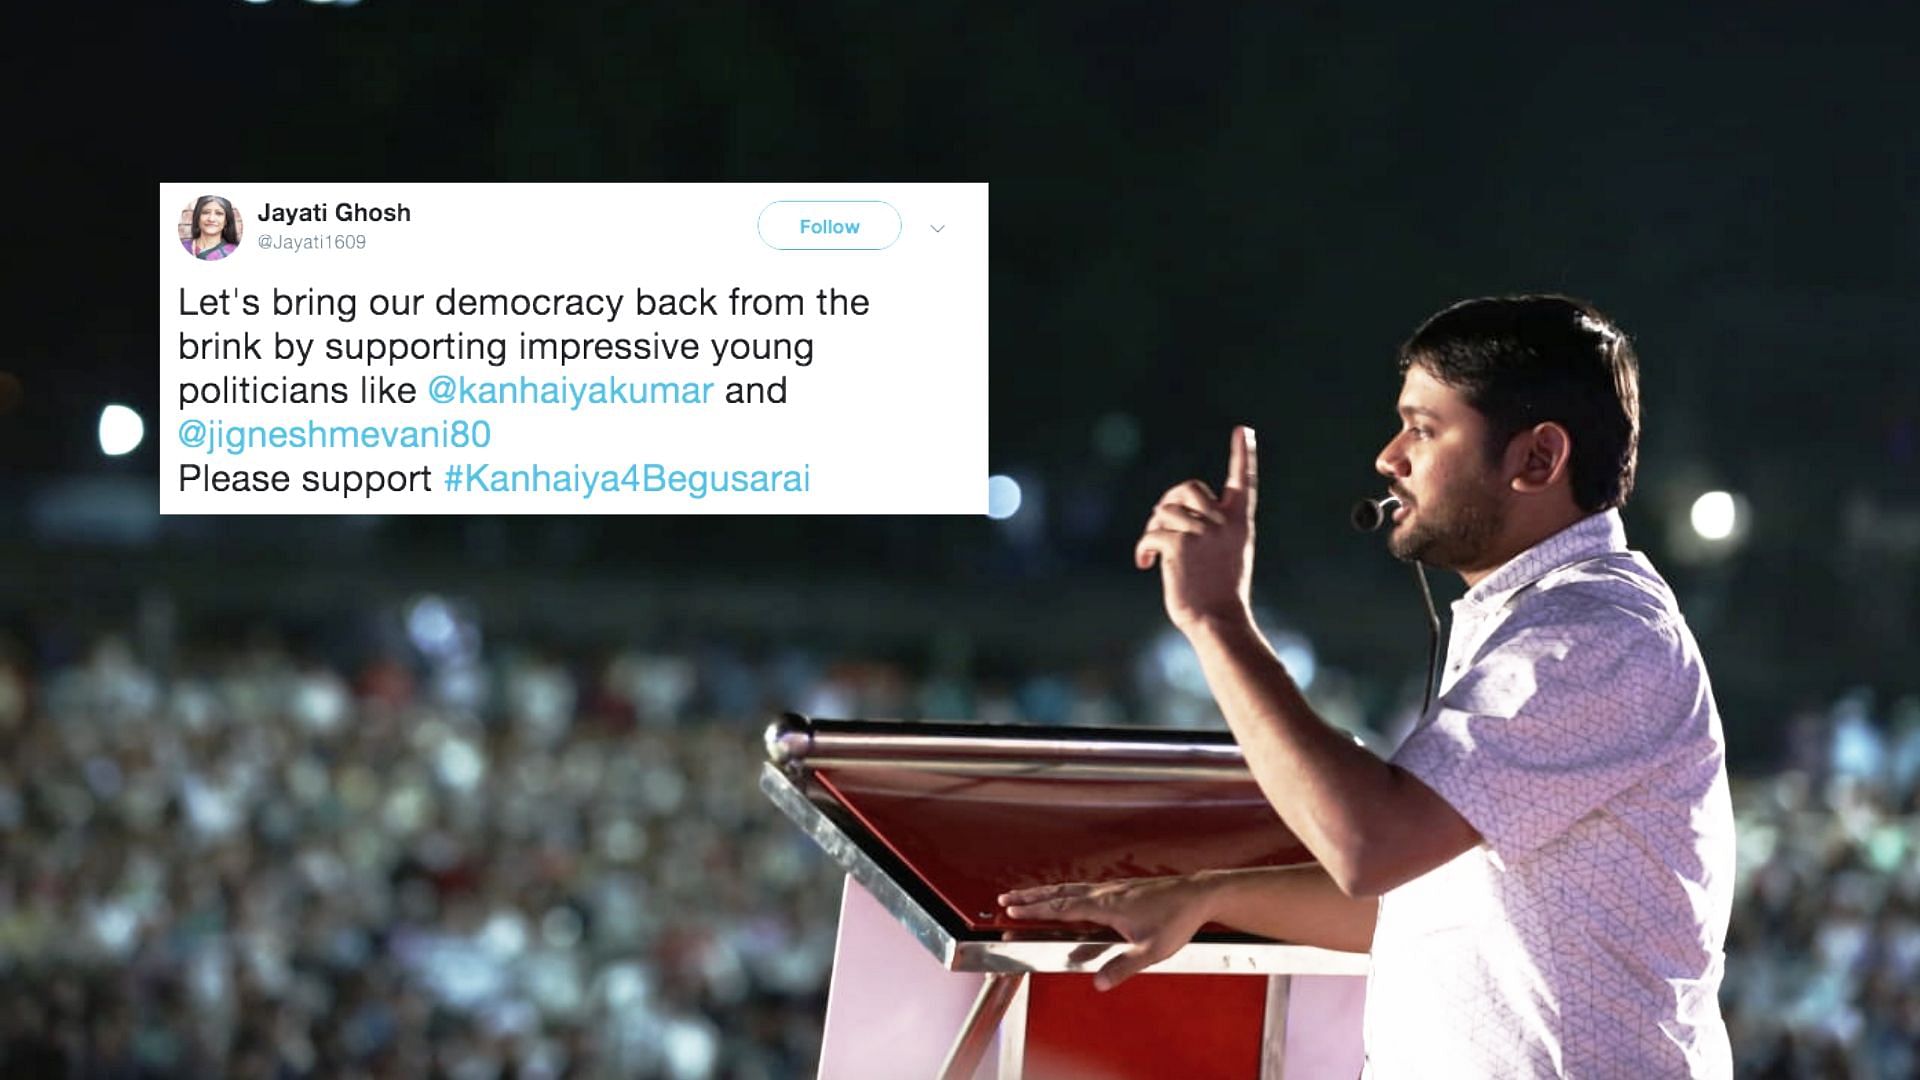 With Kanhaiya’s foray into national politics front, people have expressed how they see this move as an attempt to revive democracy.